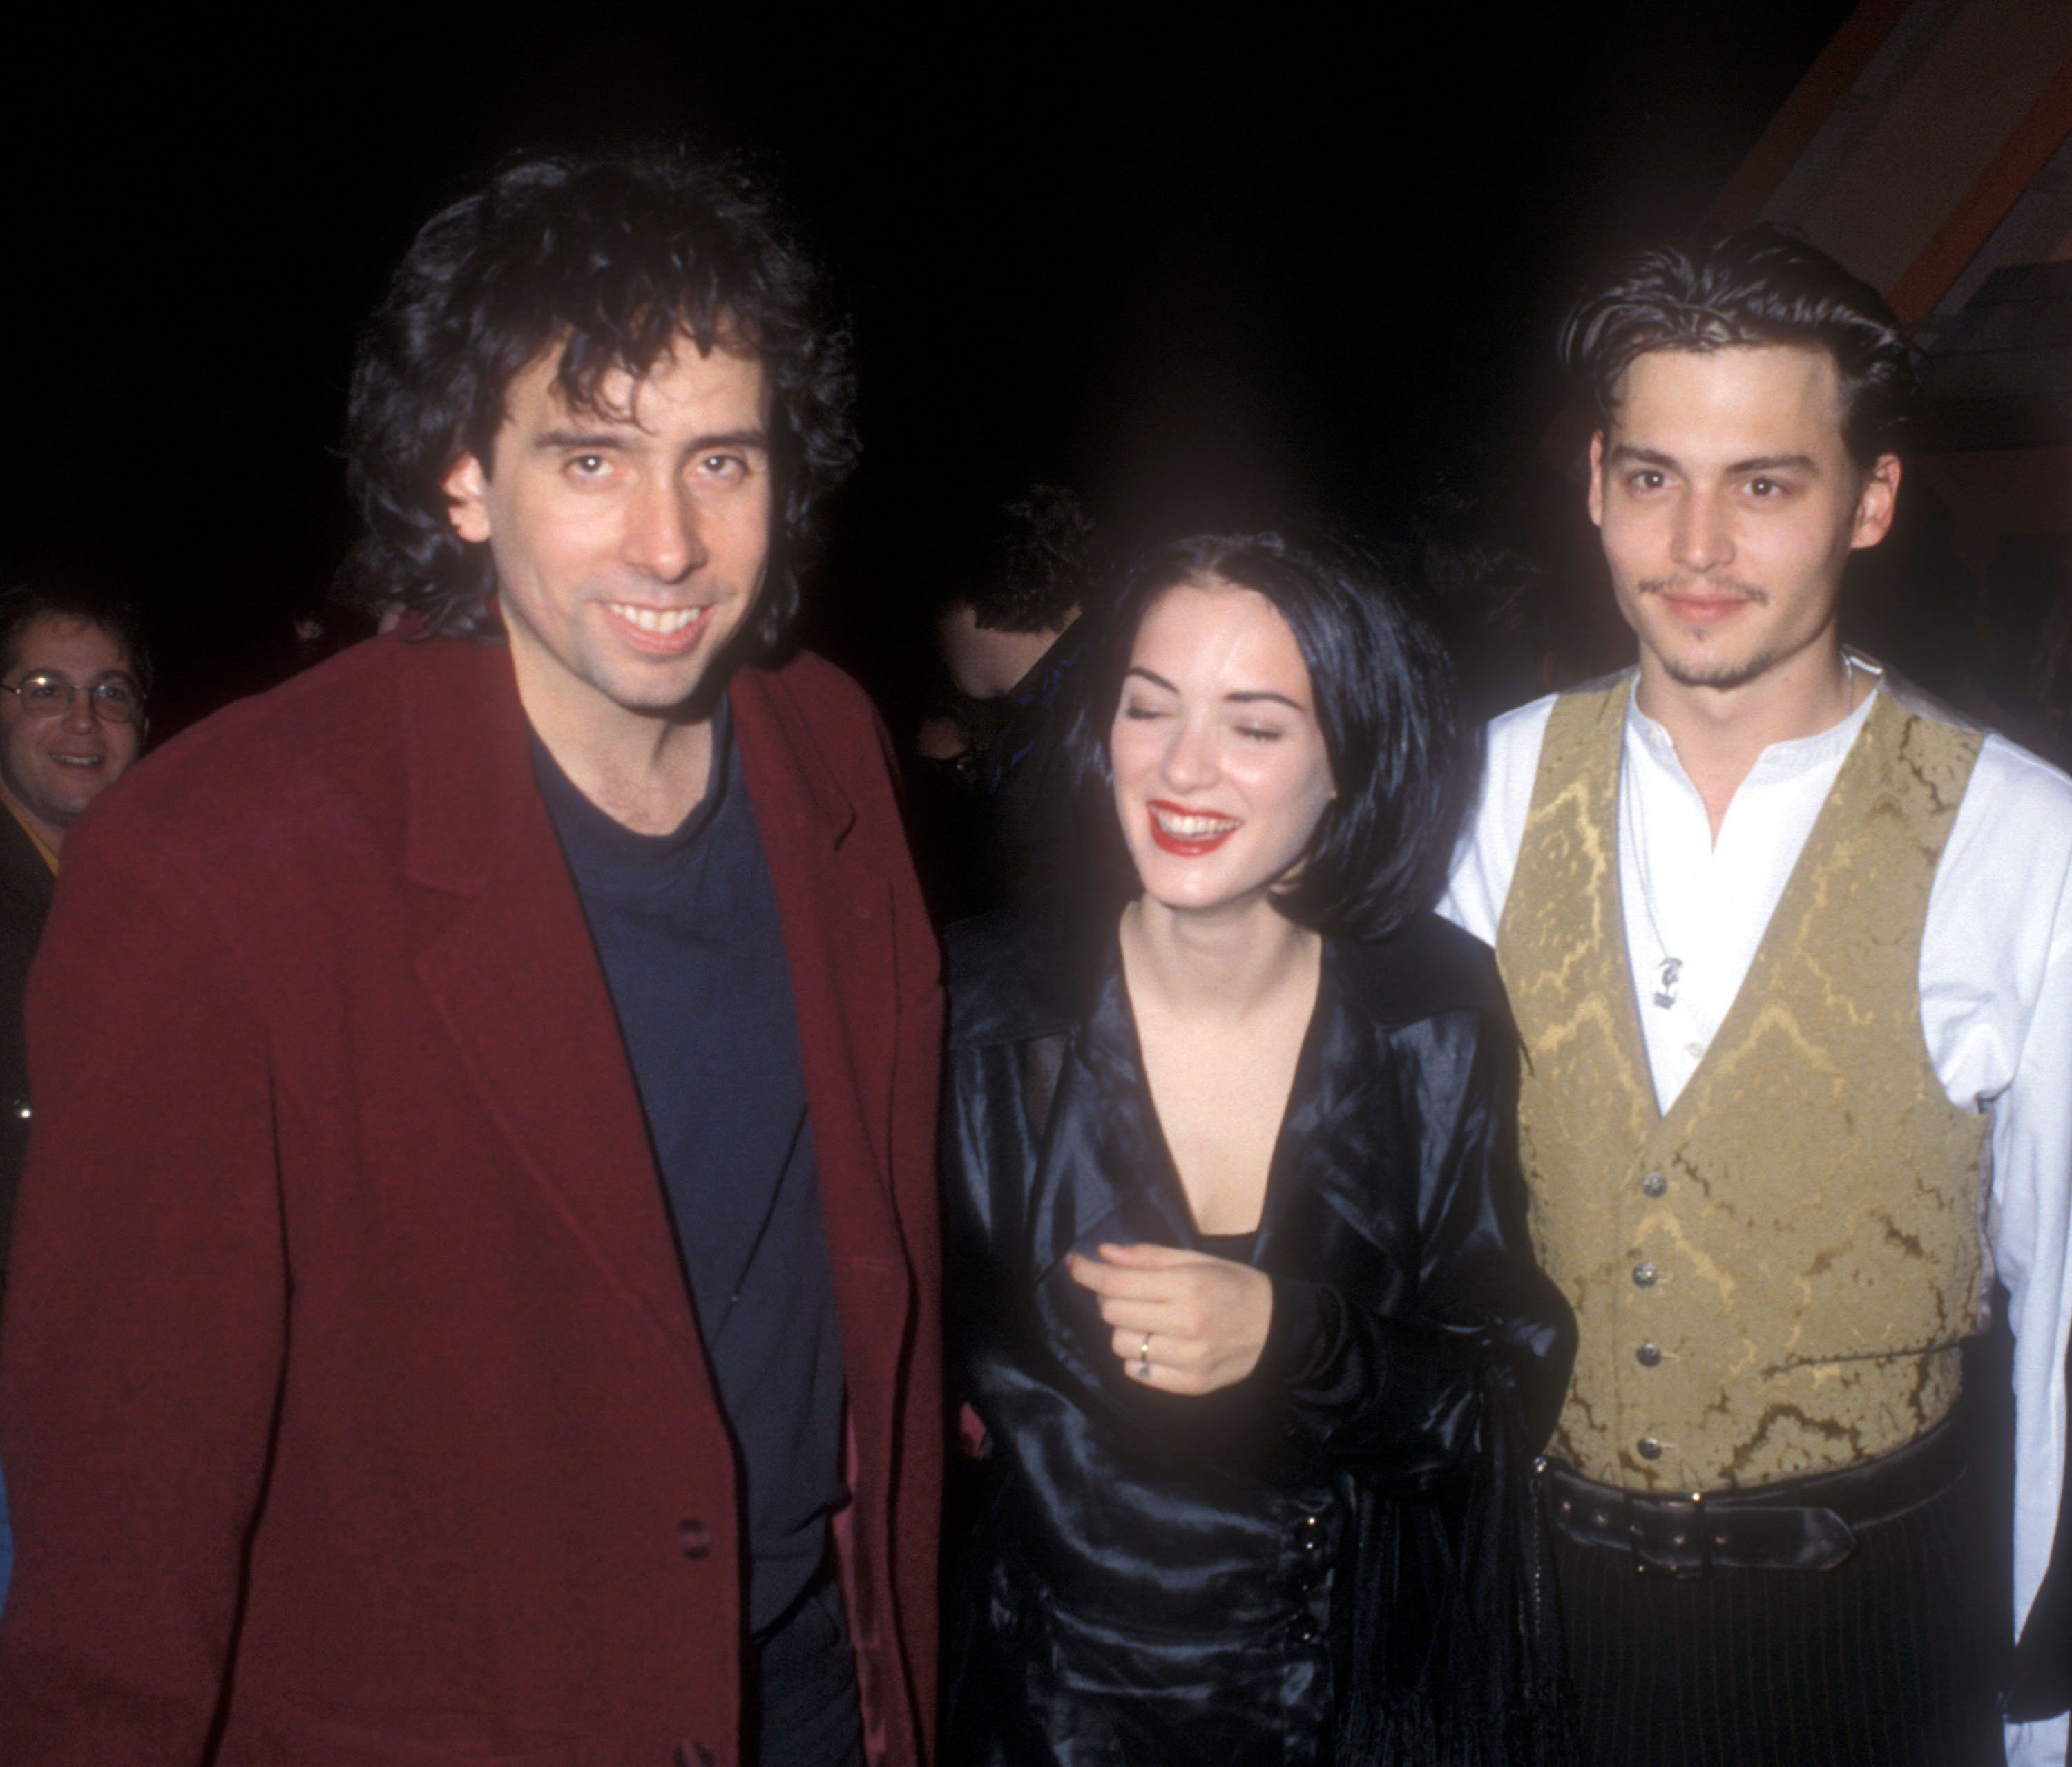 Tim Burton, Winona Ryder, and Johnny Depp at the "Edward Scissorhands" premiere on December 6, 1990. | Source: Barry King/WireImage/Getty Images